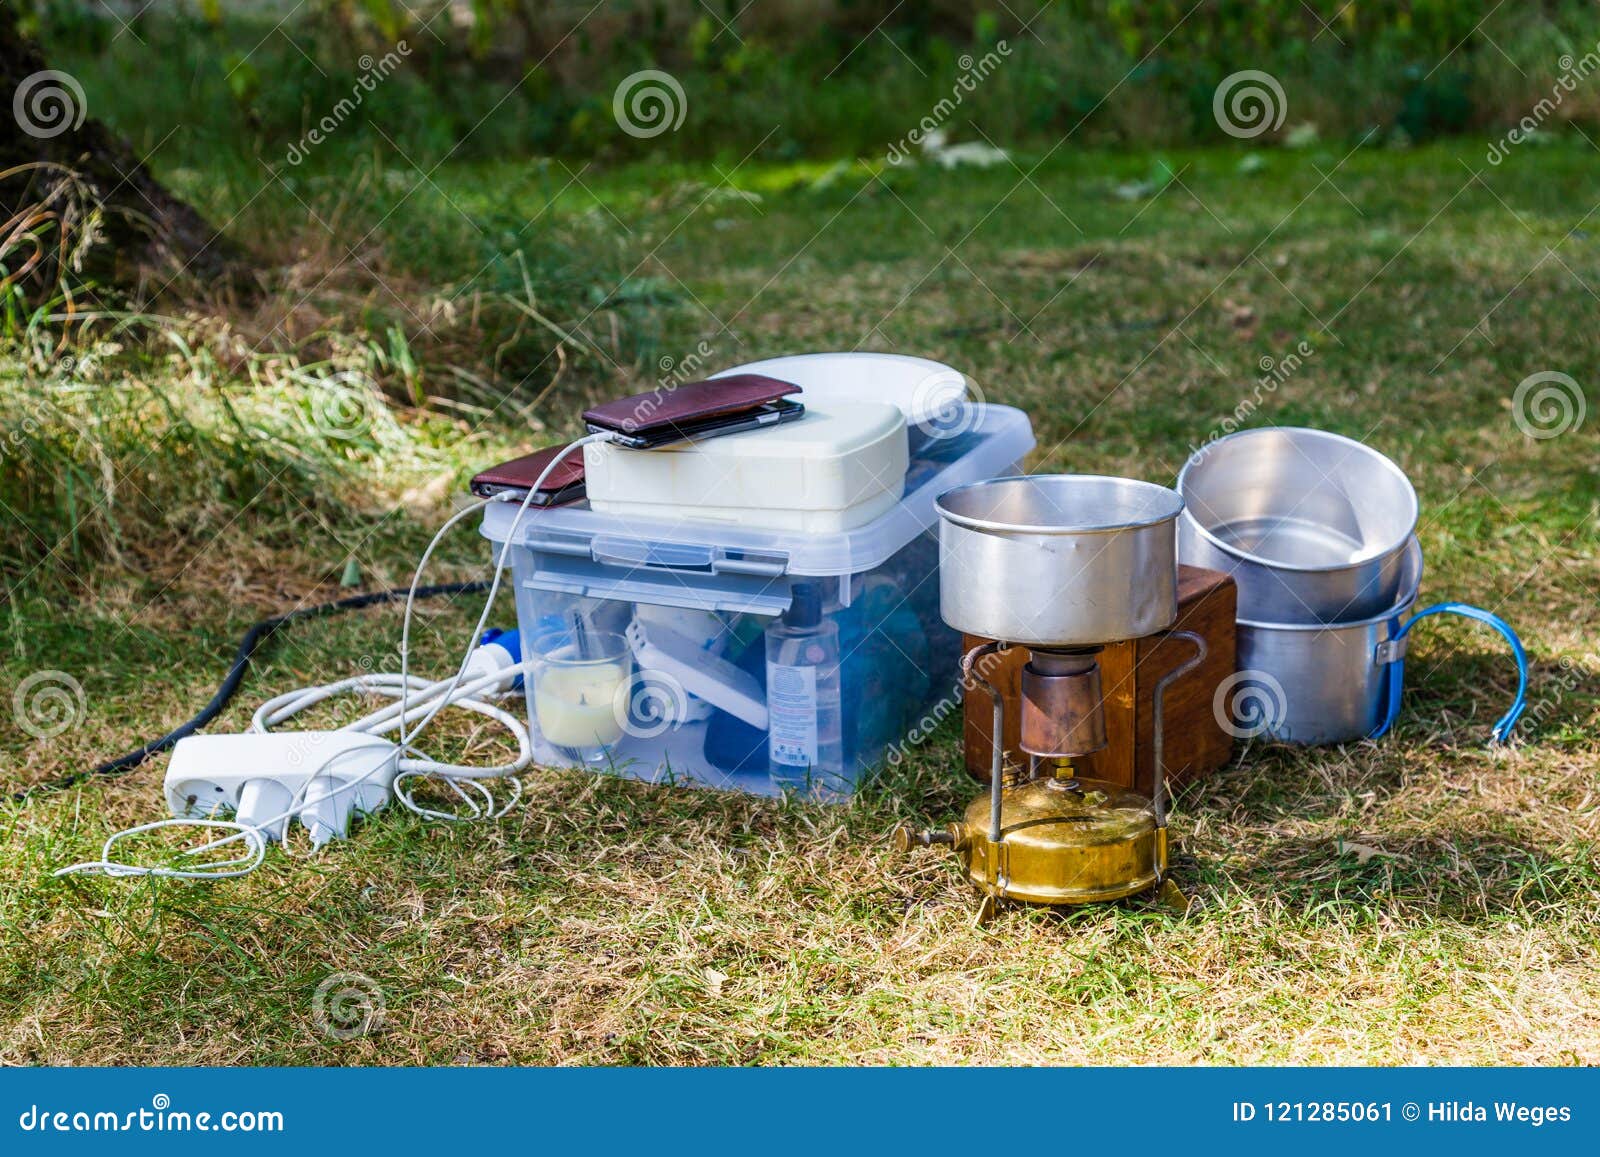 Camping Equipment on a Campsite Stock Image - Image of equipment ...